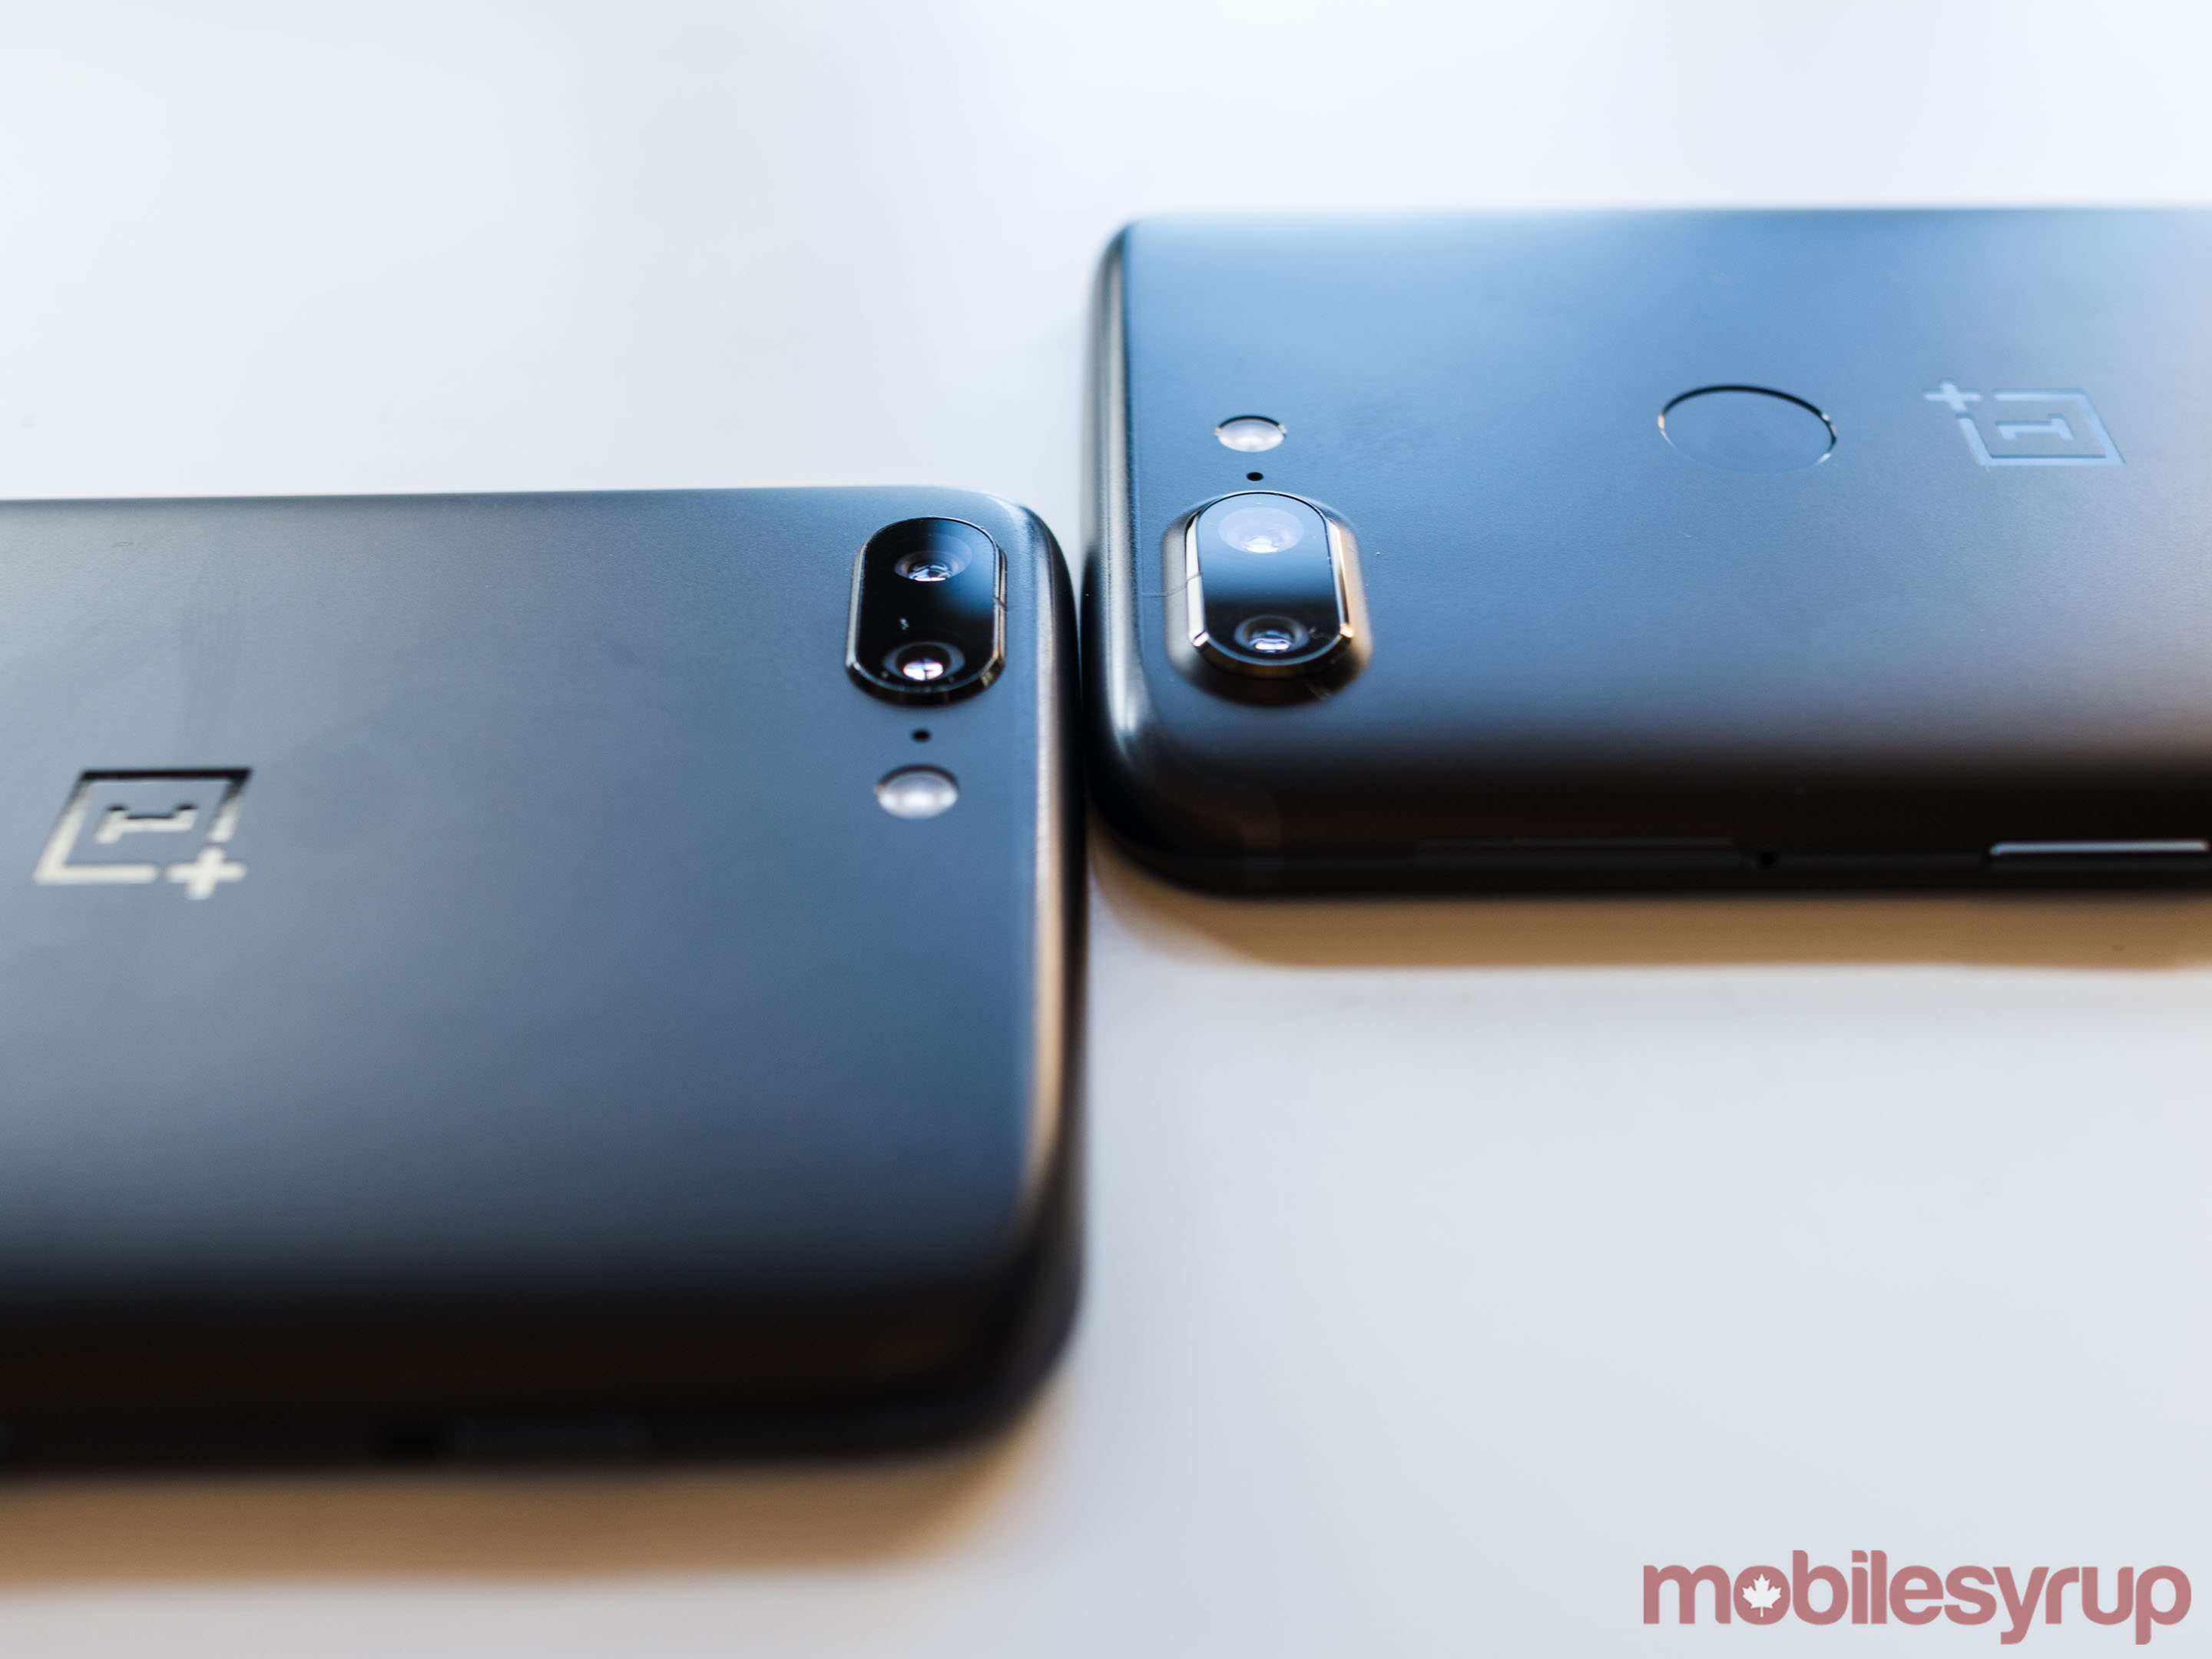 A comparison of the OnePlus 5 and 5T's camera bumps